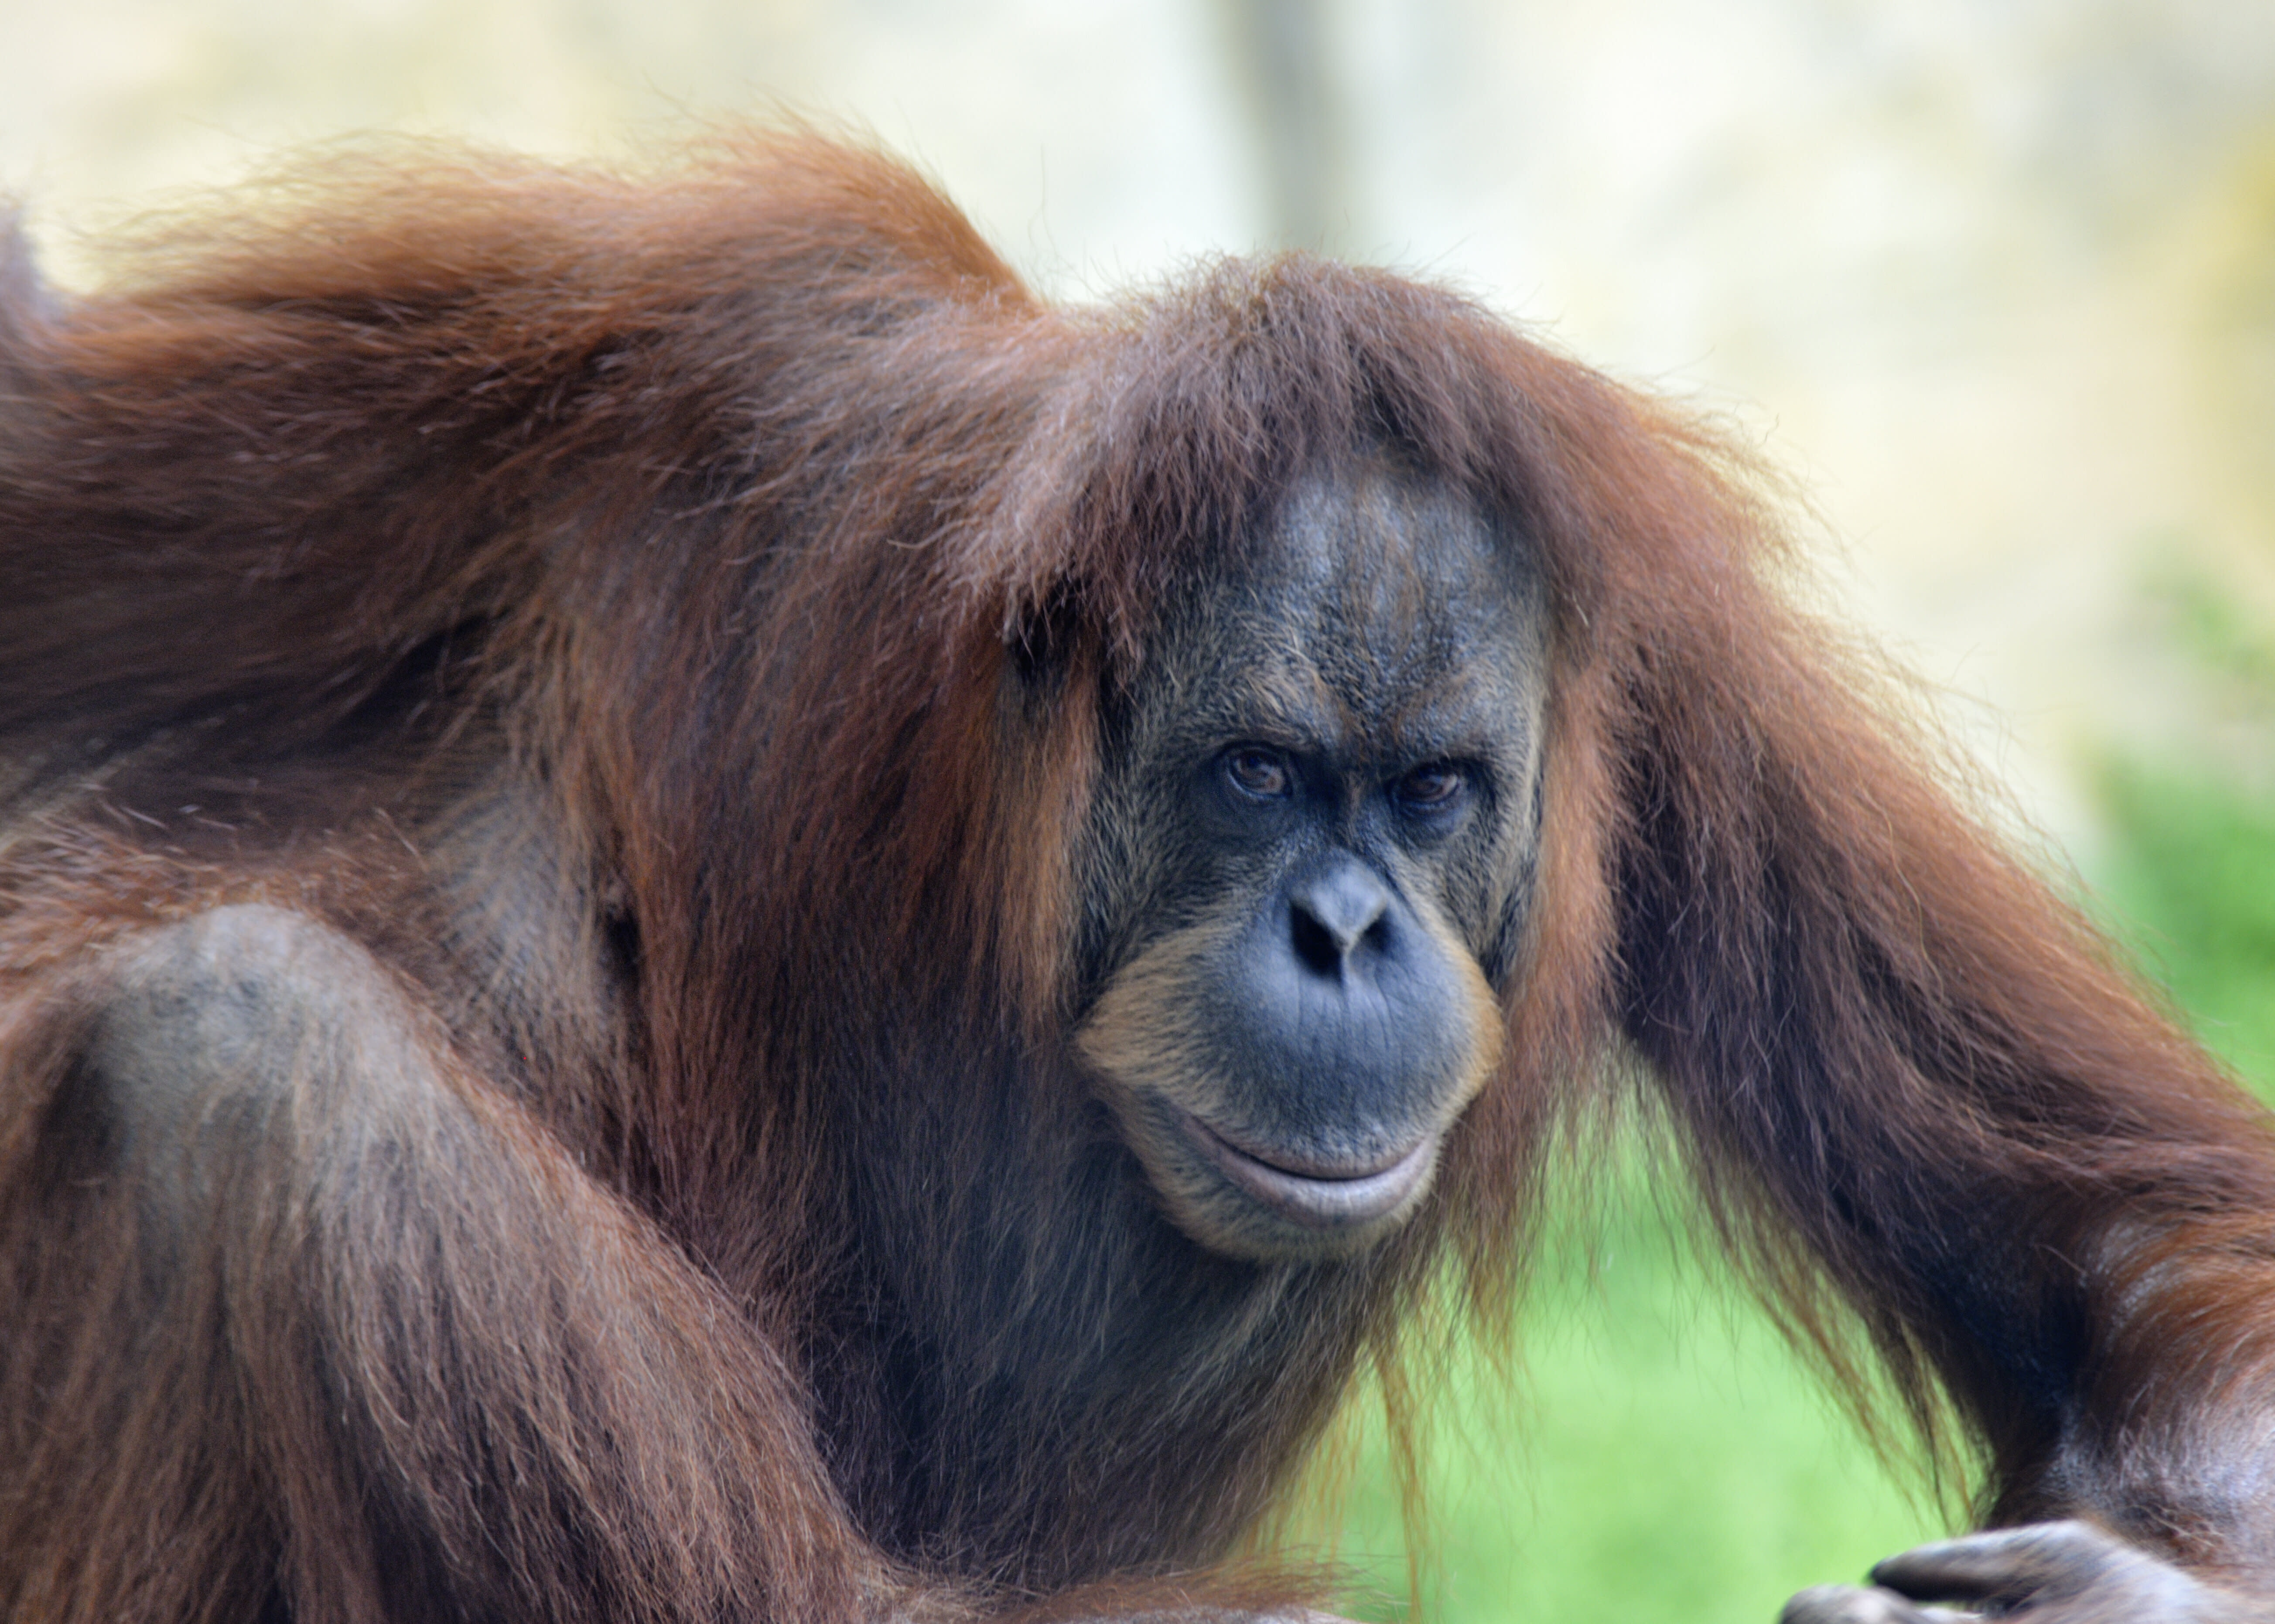 Melbourne Zoo  forced into lockdown by escaped orangutan 